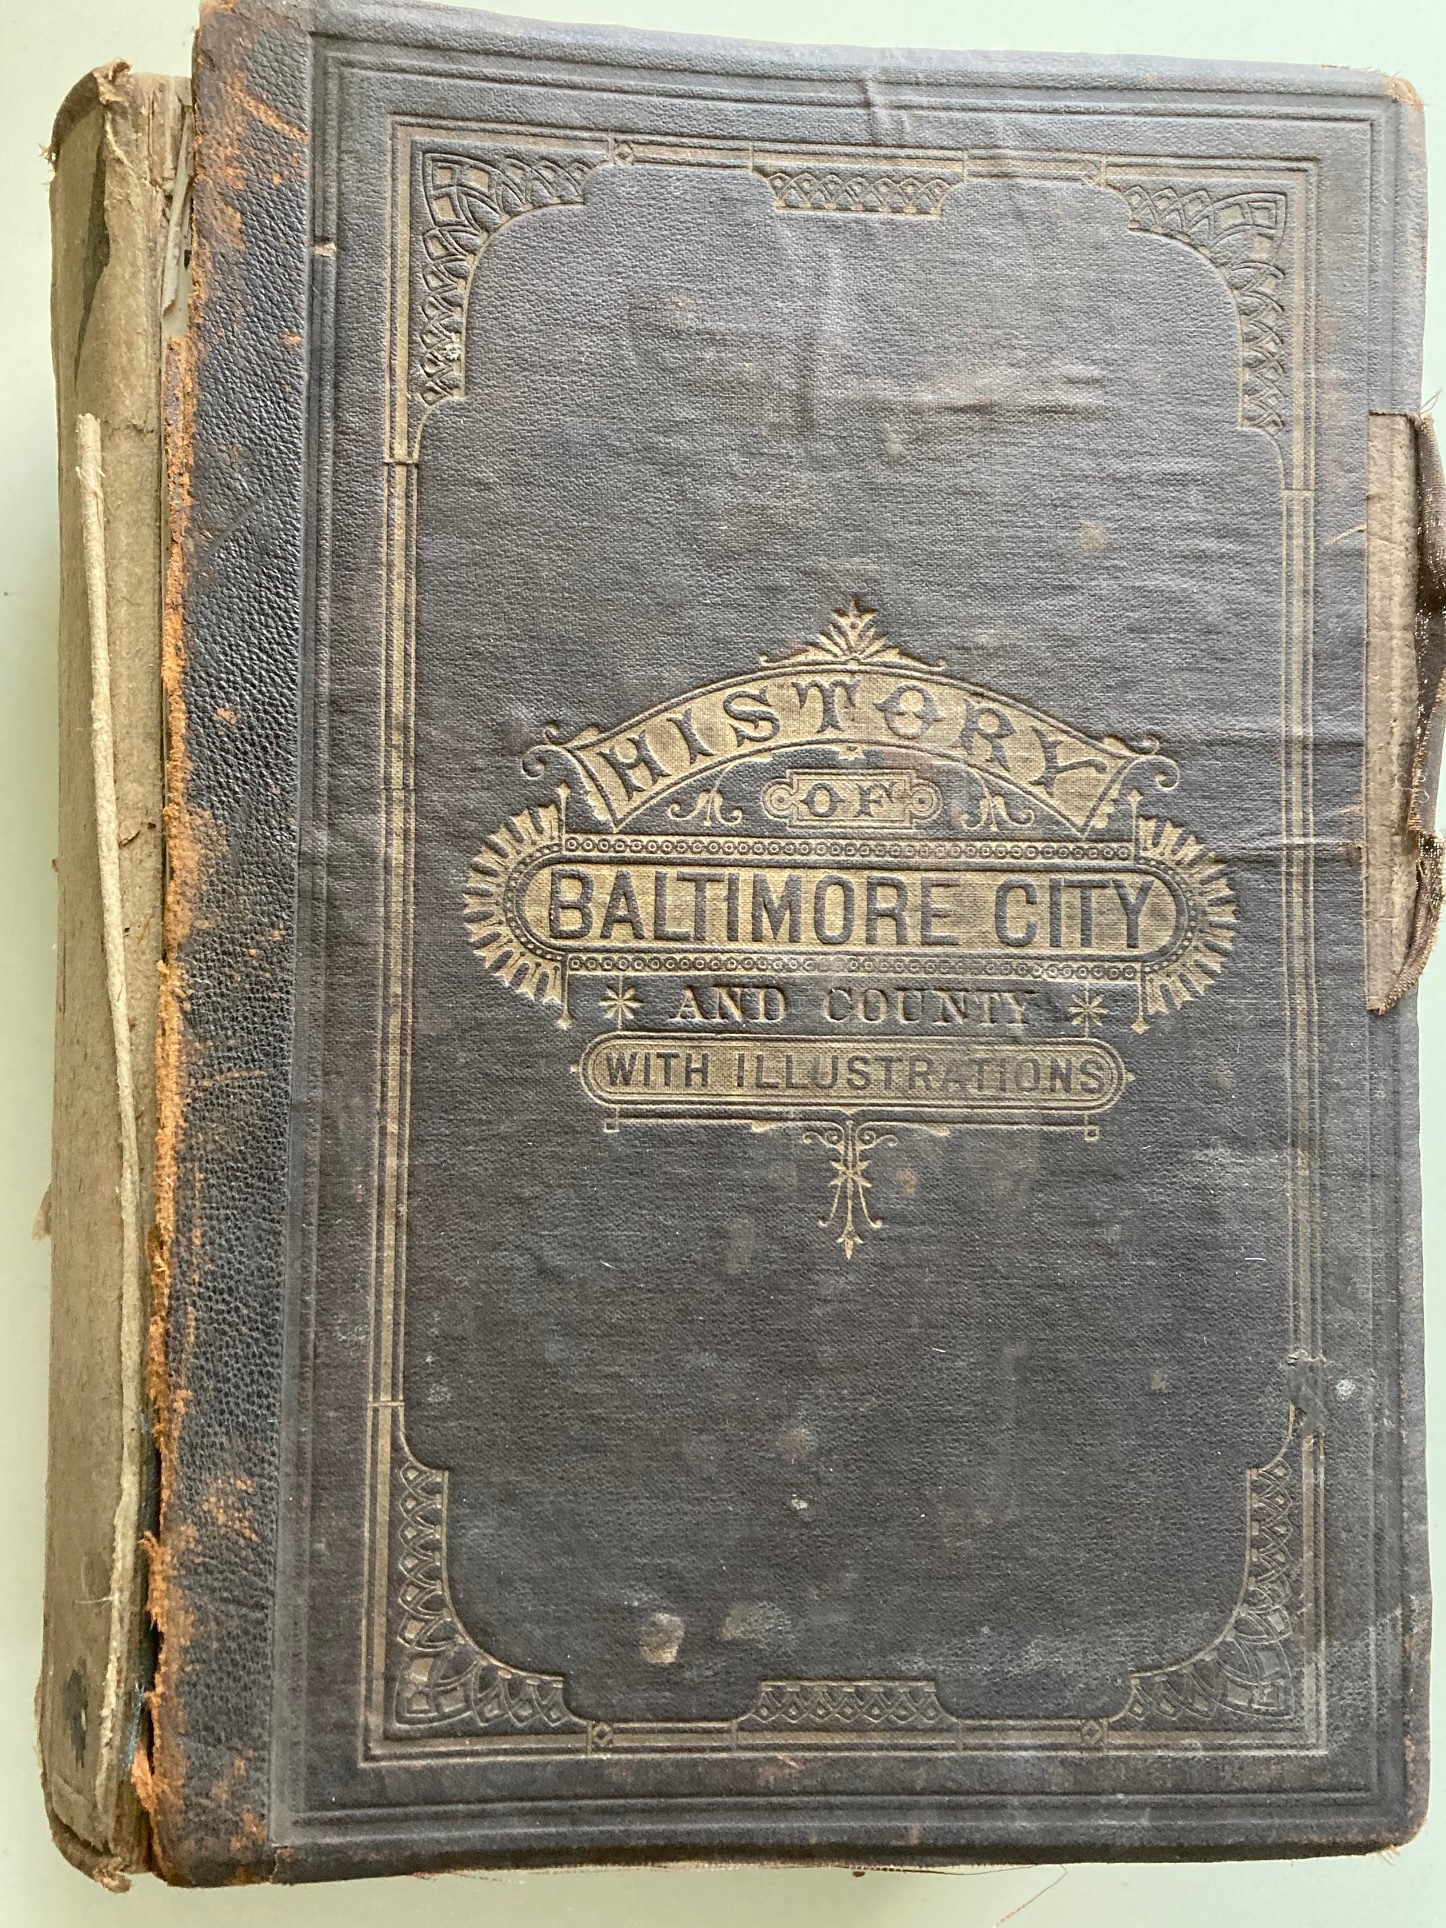 History of Baltimore City and County From